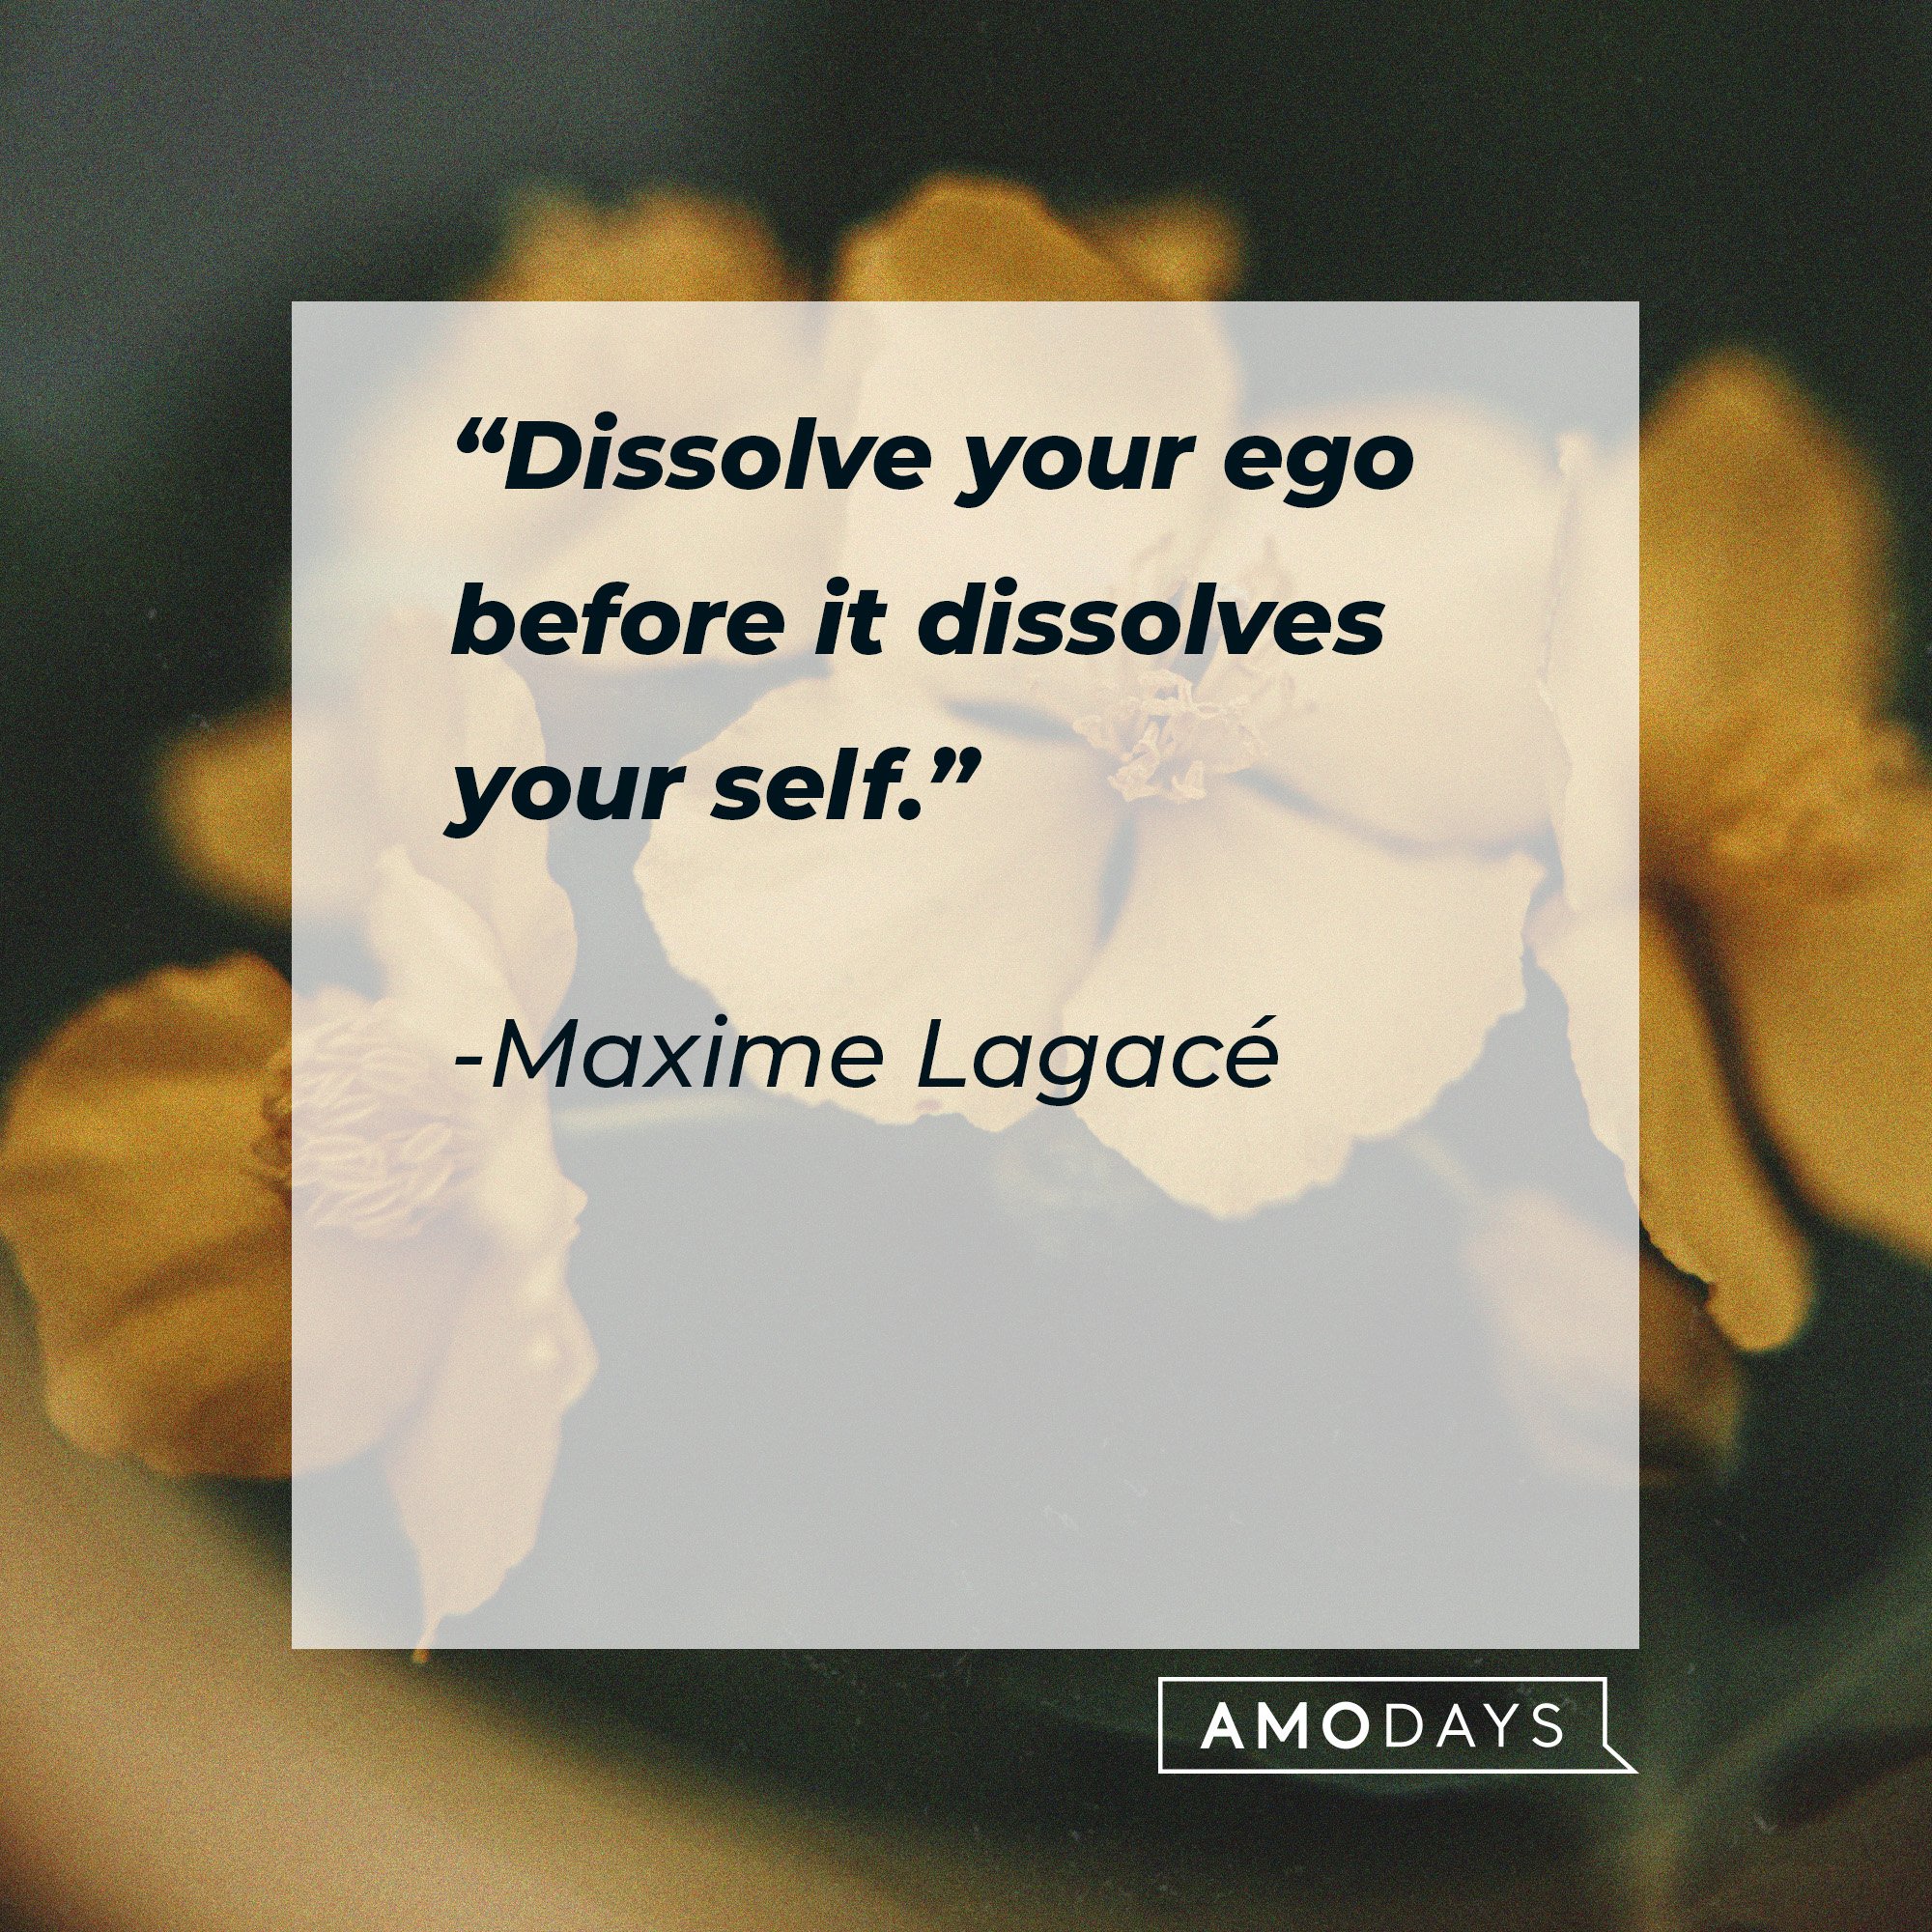 Maxime Lagacé's quote: “Dissolve your ego before it dissolves your self.” | Image: AmoDays